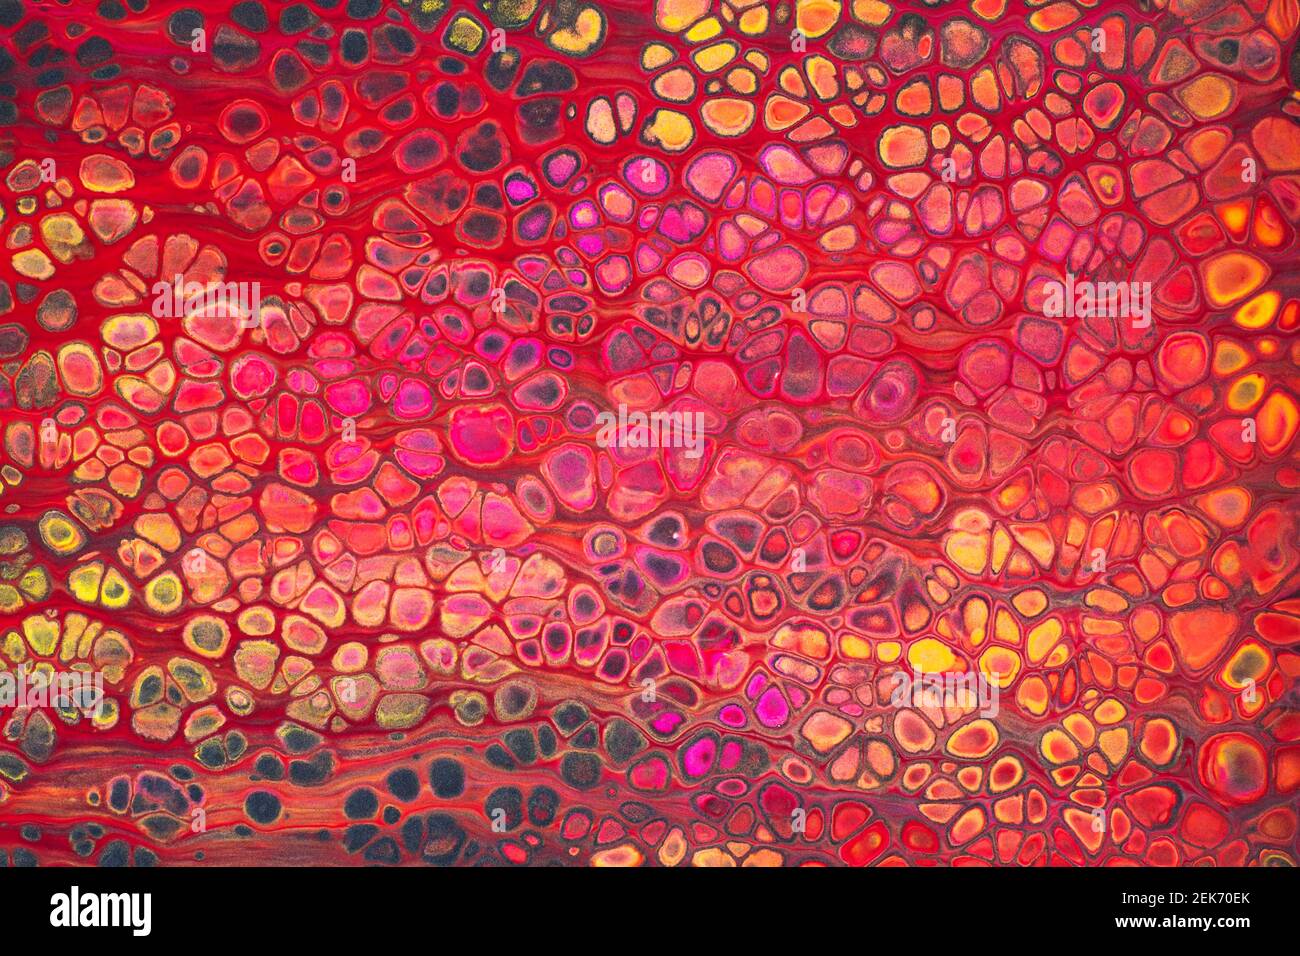 Colorful abstract acrylic painting in red and yellow. Free flowing cells. Pouring. Stock Photo